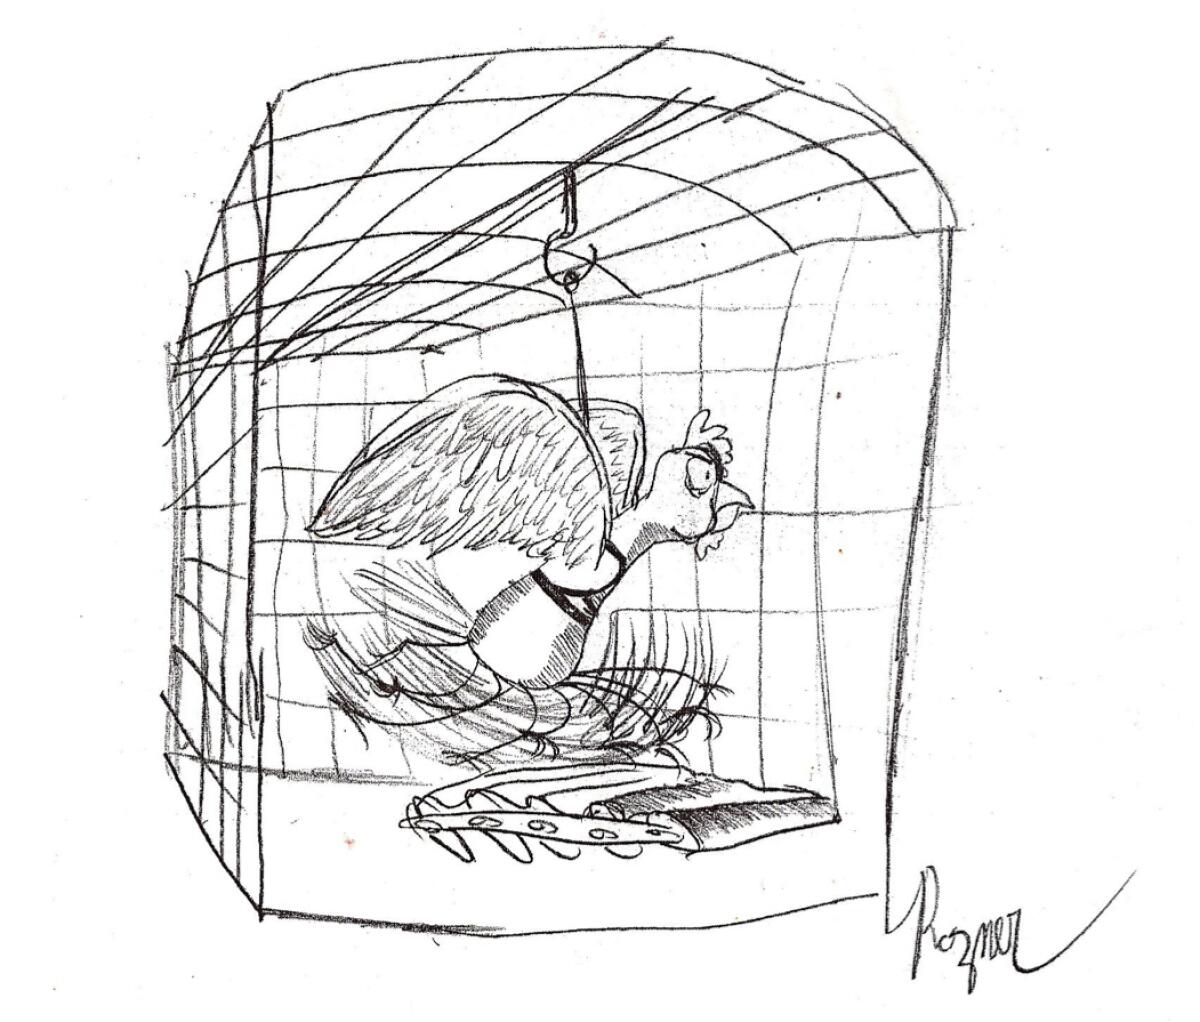 A black-and-white drawing of a bird sprinting on treadmill rollers in a cage